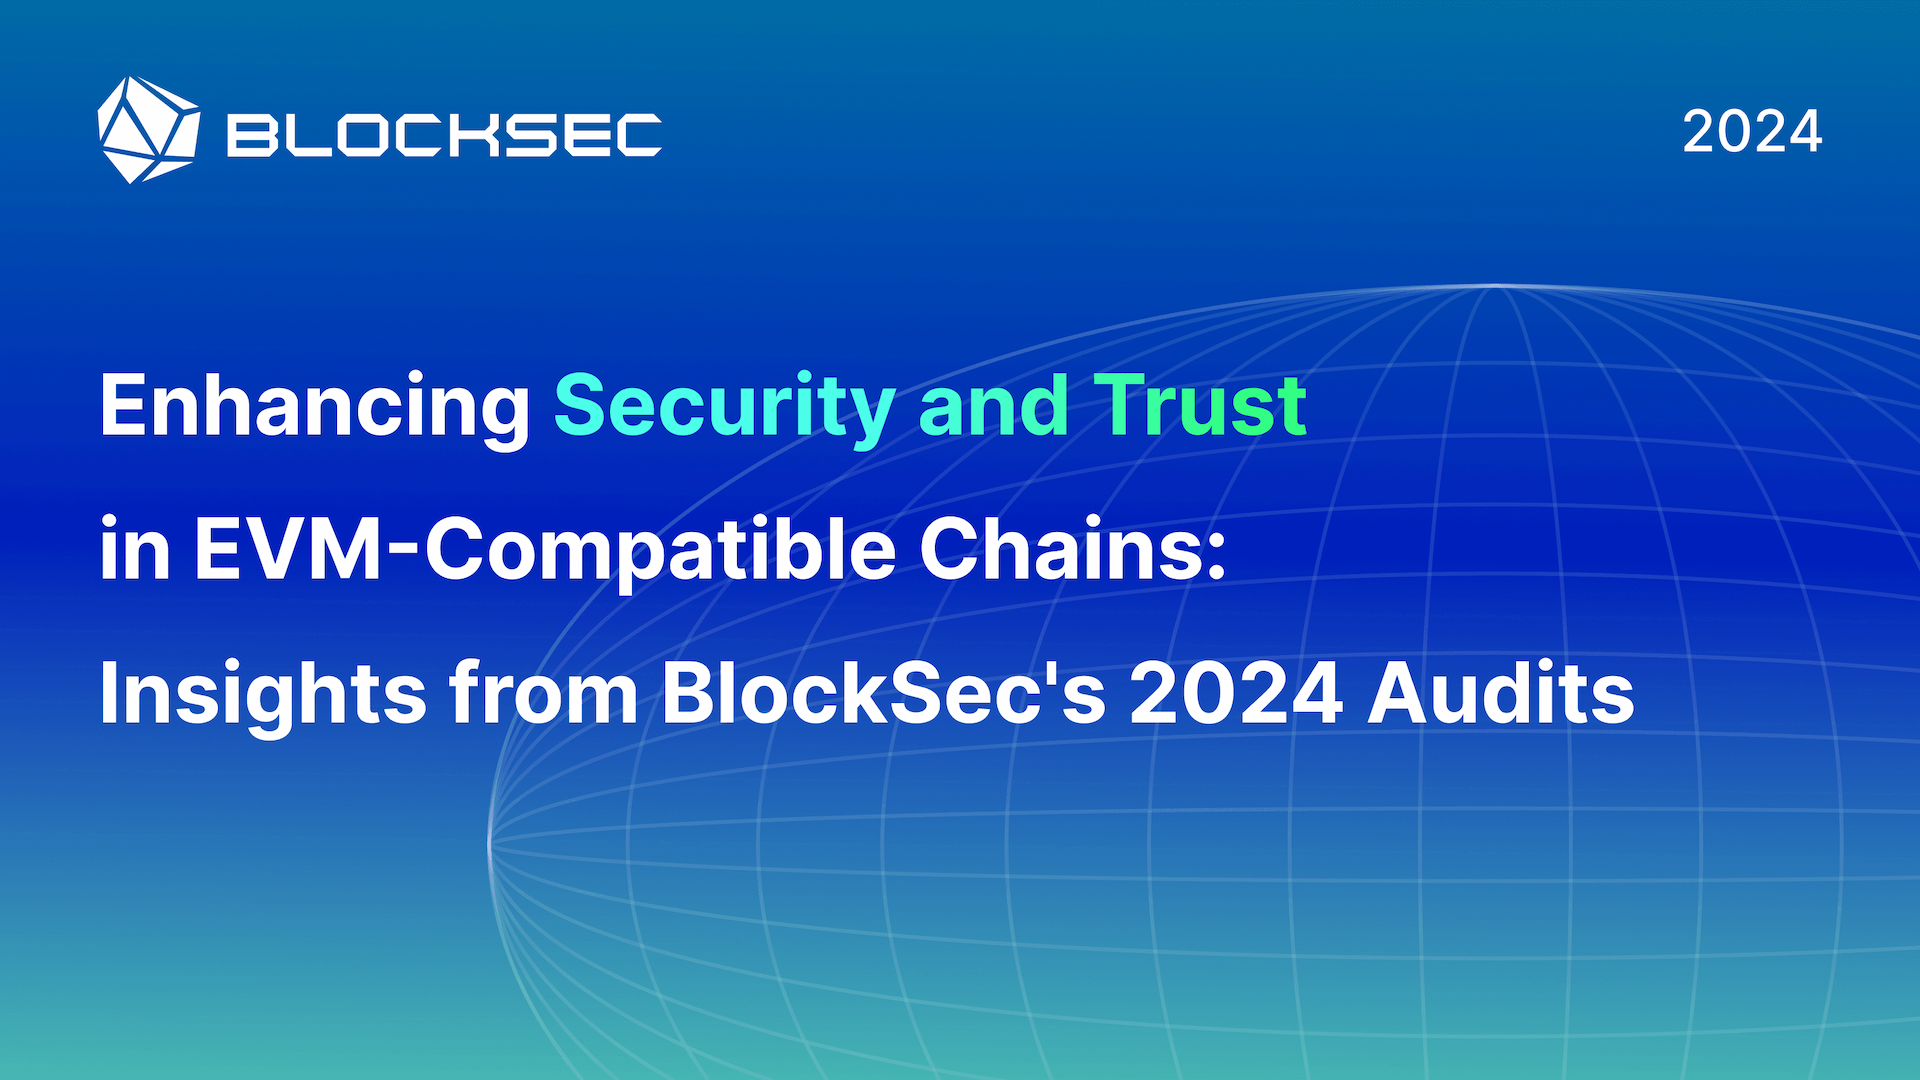 Enhancing Security and Trust in EVM-Compatible Chains: Insights from BlockSec's 2024 Audits